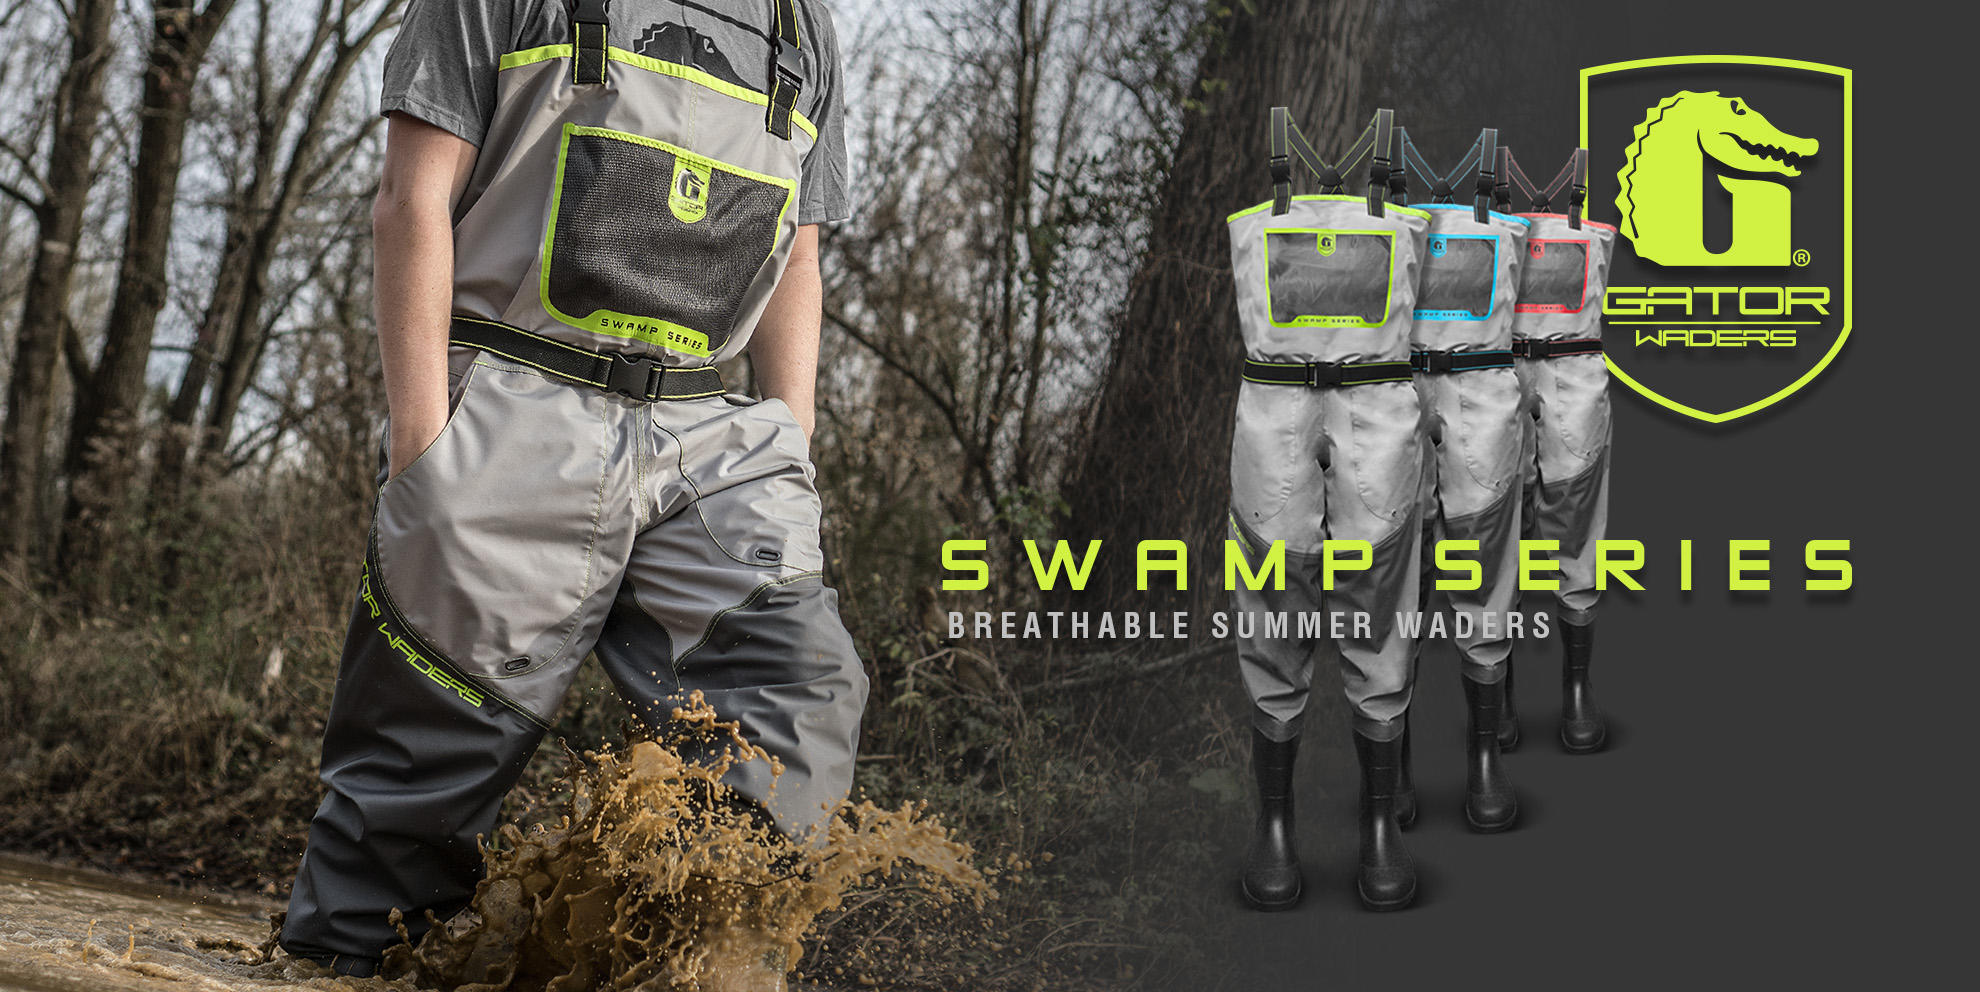 NOW AVAILABLE  Gator Waders - UTV Source